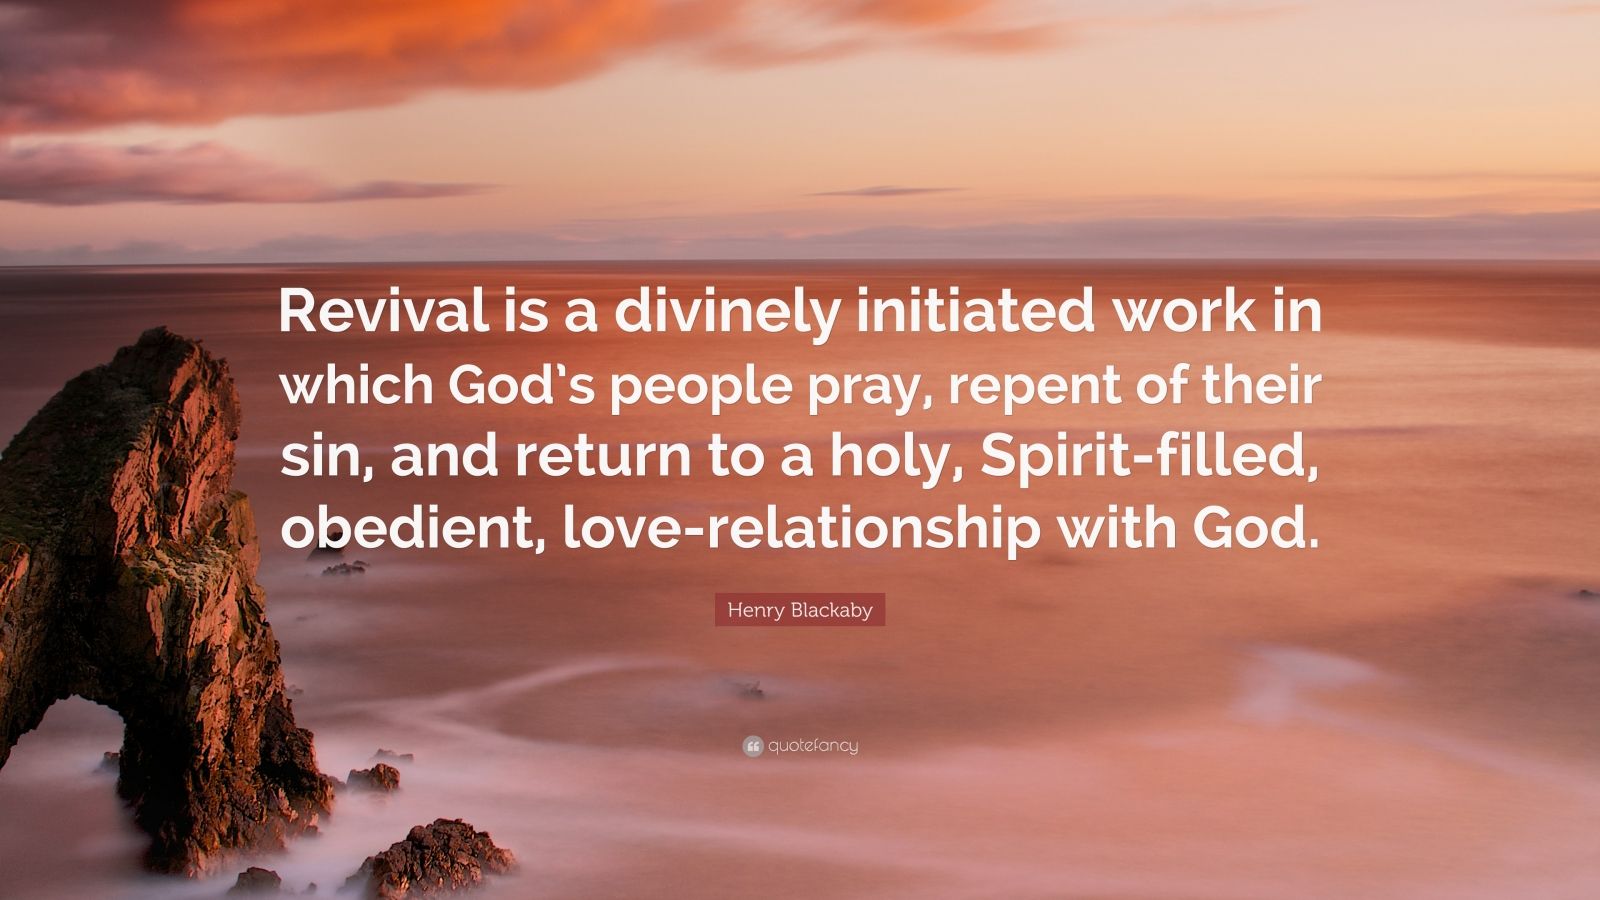 Henry Blackaby Quote: “Revival is a divinely initiated work in which ...